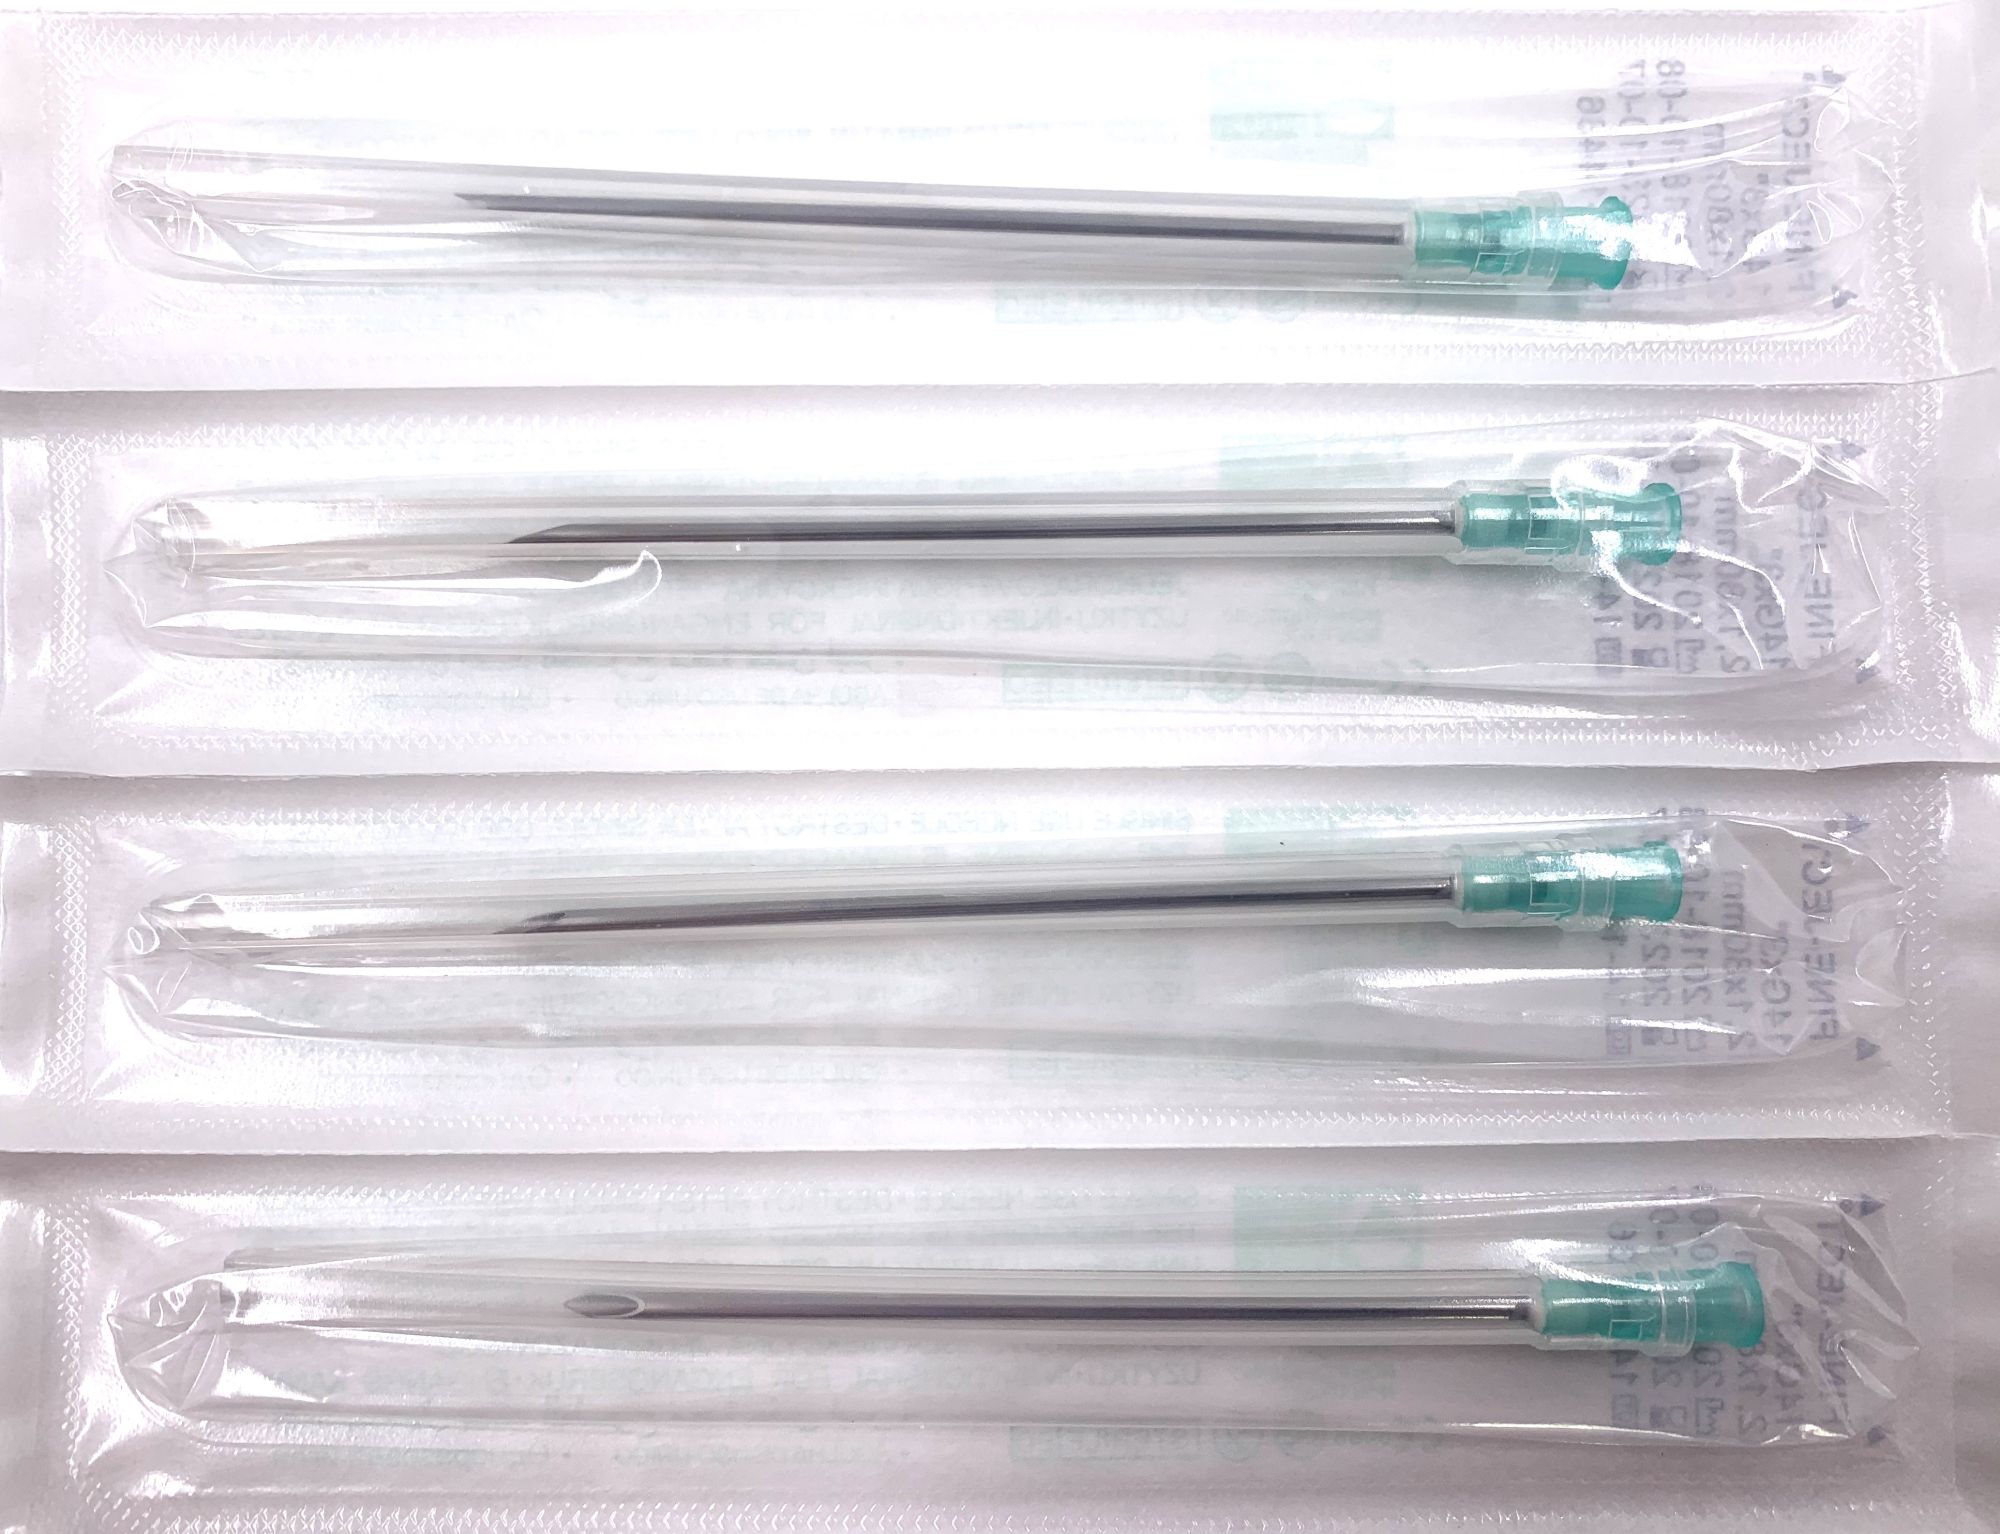 mint green disposable needle 21 x 80mm 14g x 3 per 100 pieces